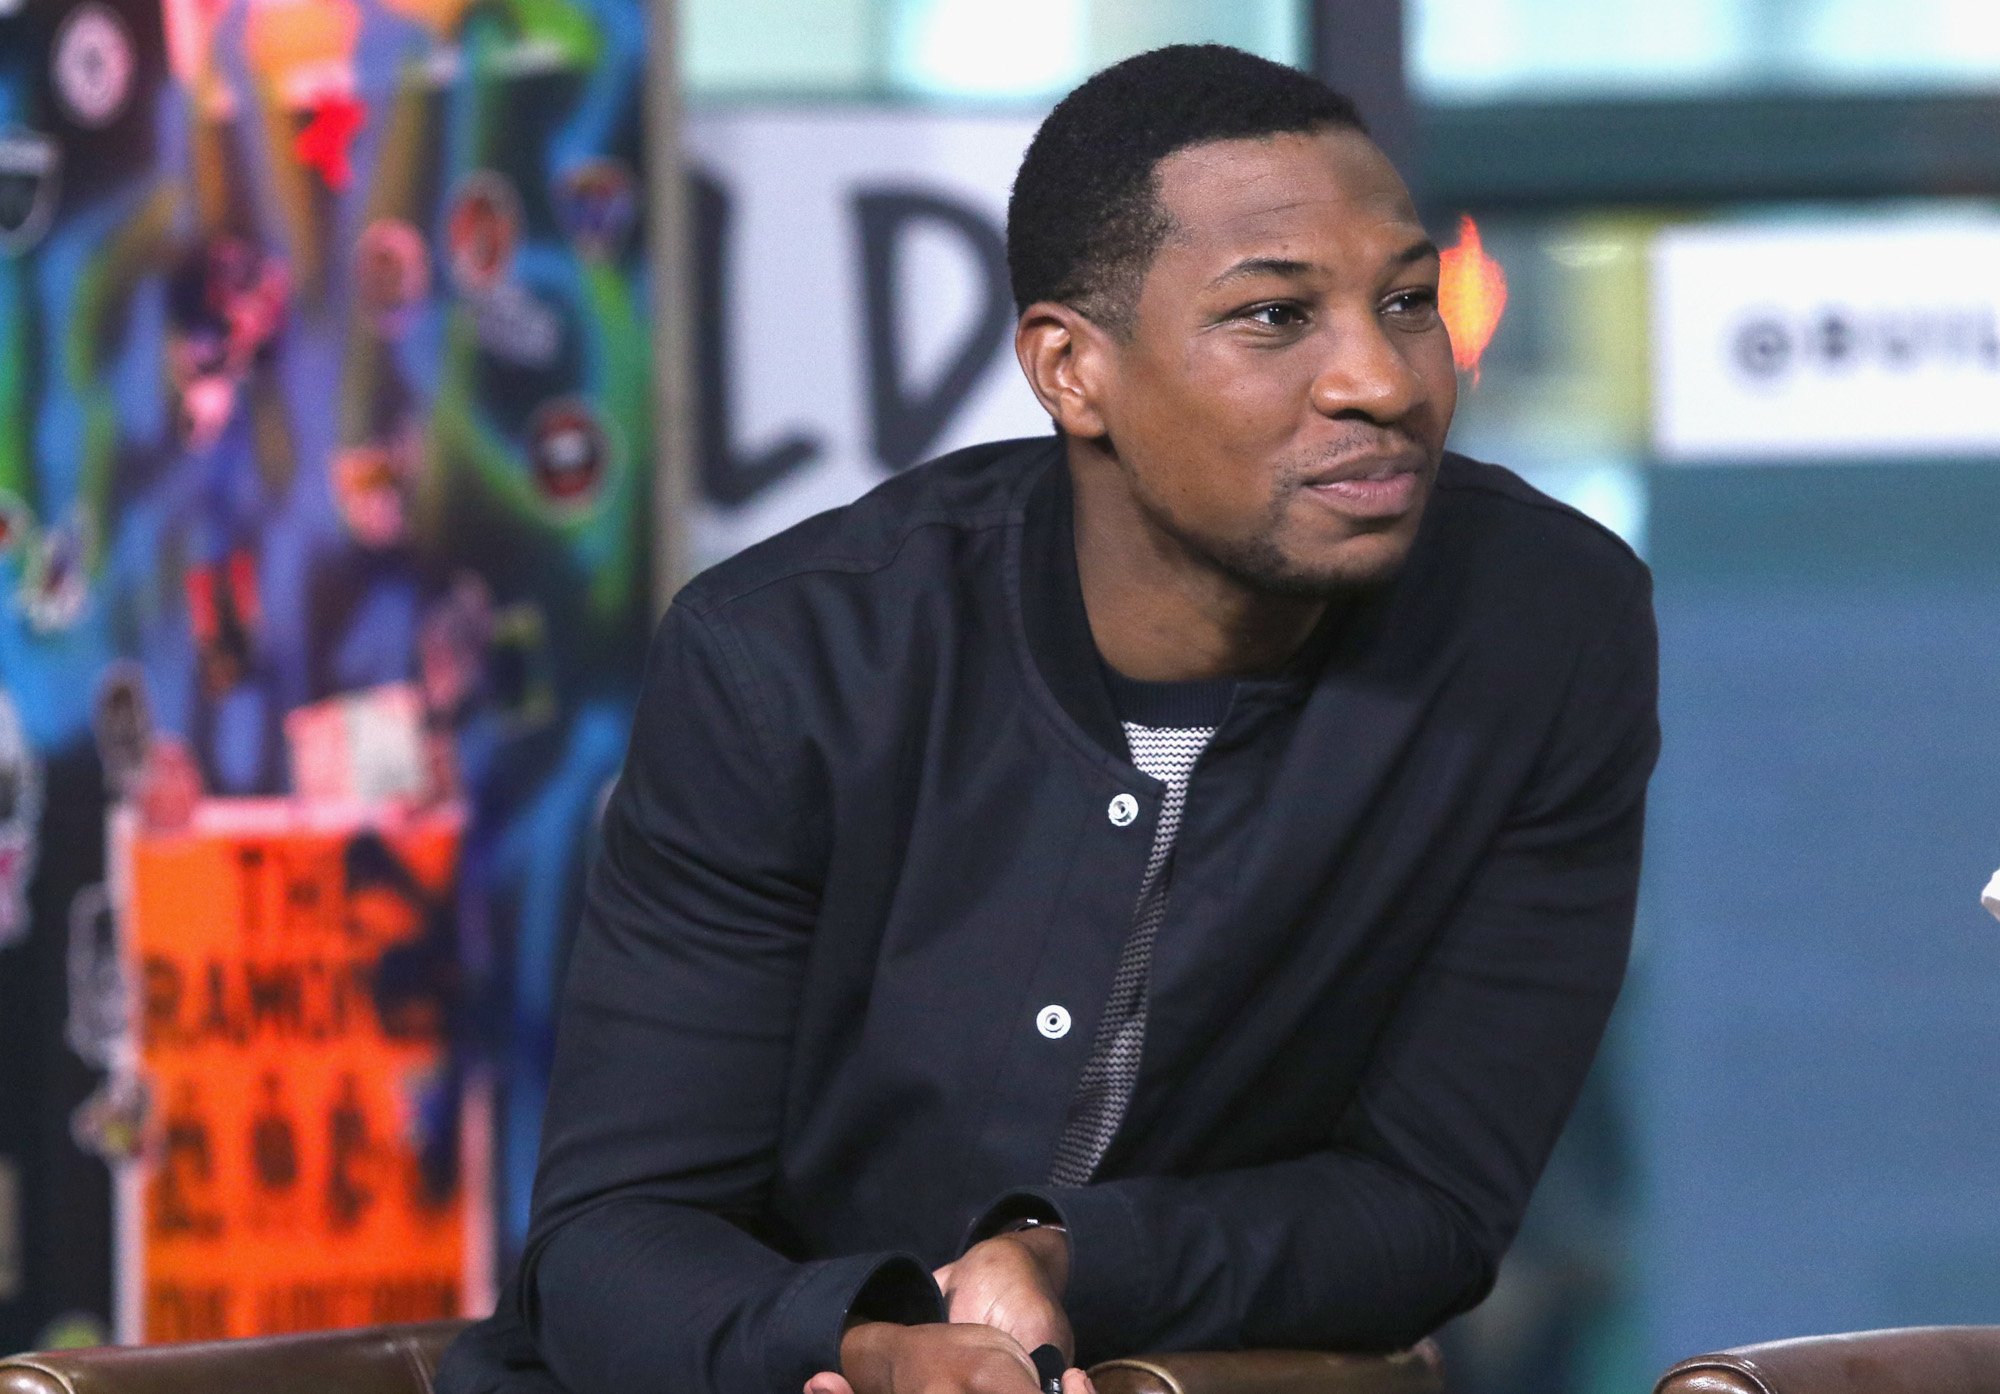 Jonathan Majors wearing a black shirt and leaning over during an event